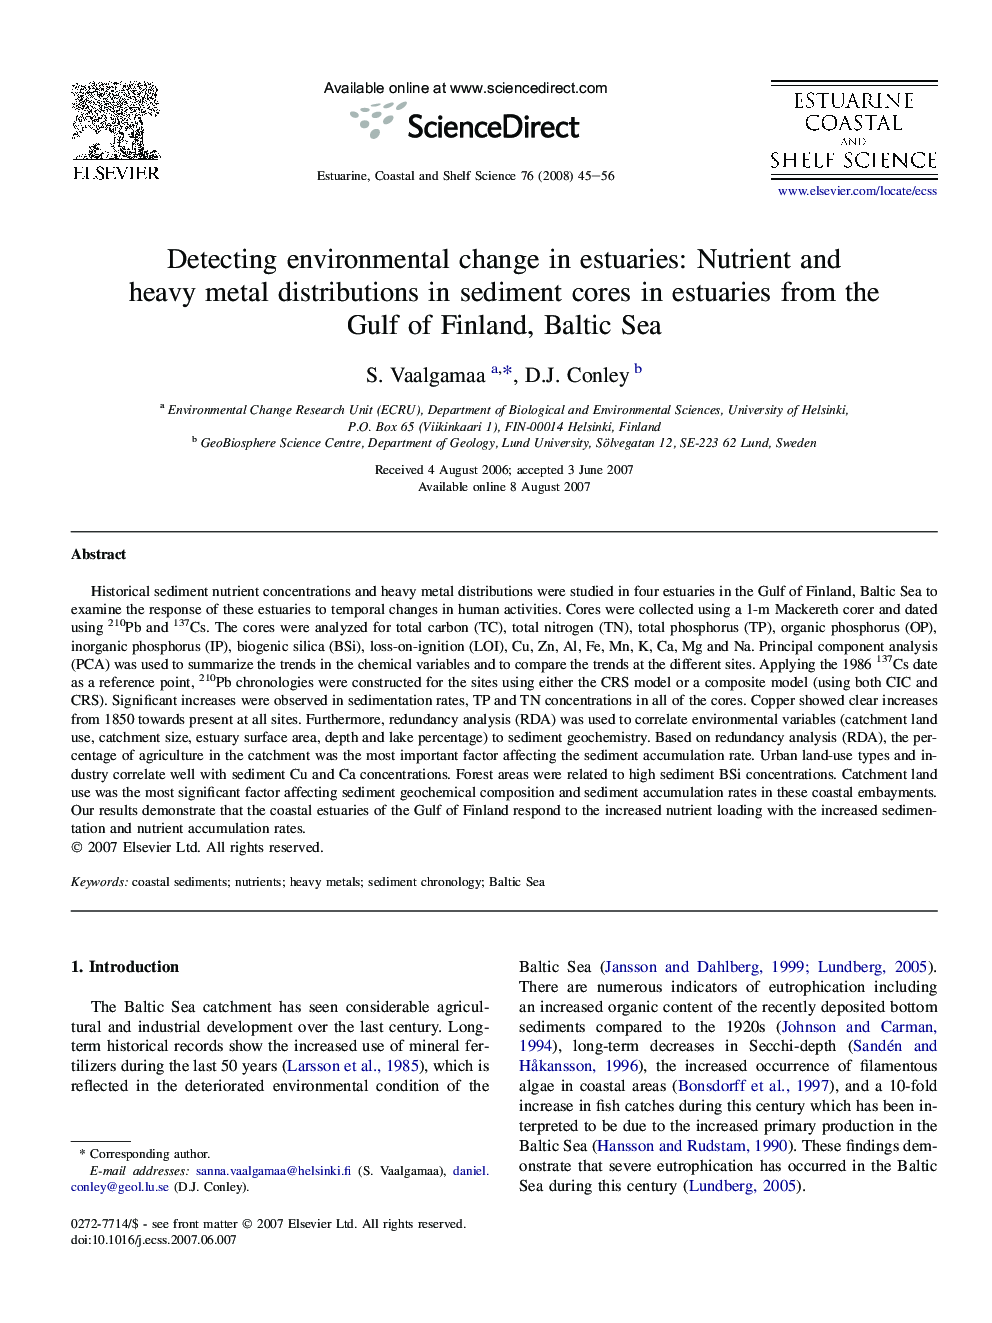 Detecting environmental change in estuaries: Nutrient and heavy metal distributions in sediment cores in estuaries from the Gulf of Finland, Baltic Sea